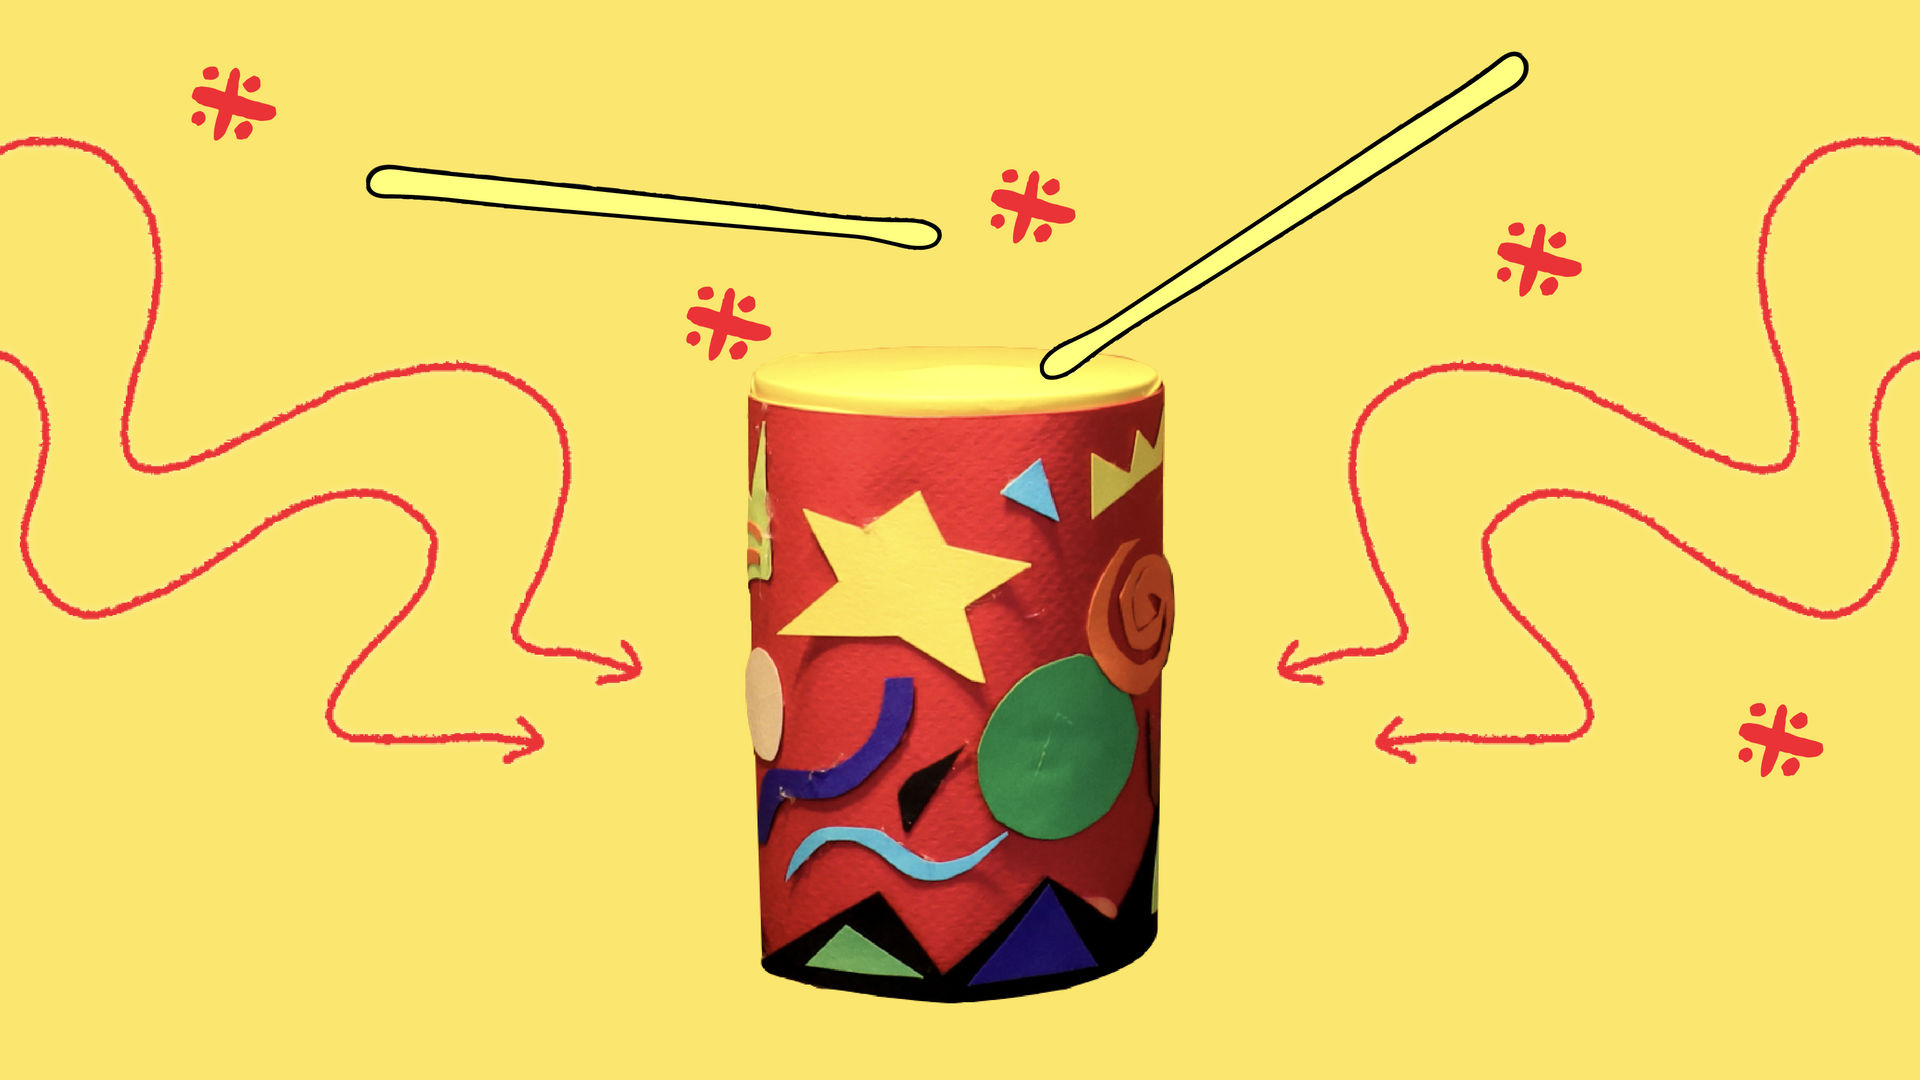 Illustrated drum sticks play atop a DIY drum made of a tin can decorated with colorful cut paper shapes; wavy arrows like sound waves point to the drum